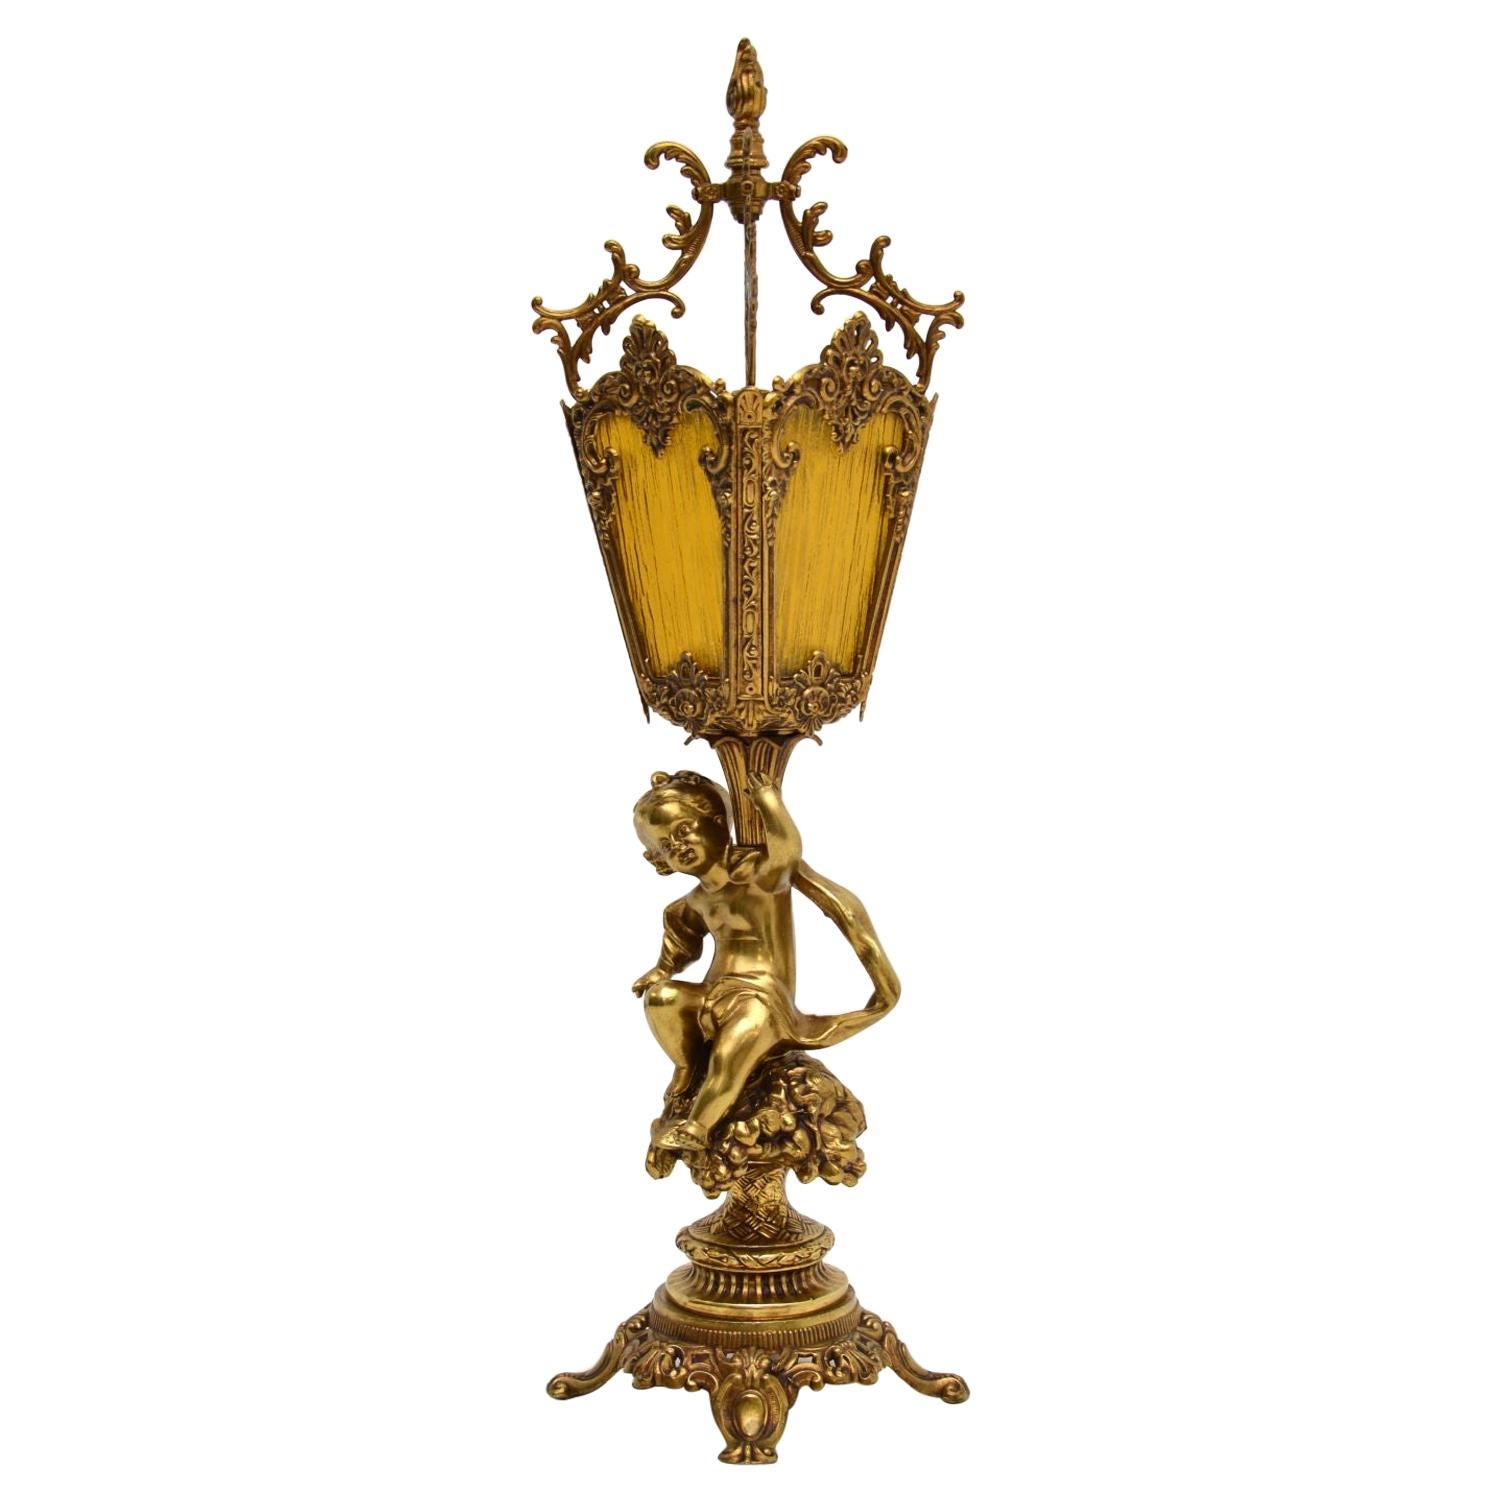 Antique French Gilt Metal and Glass Cherub Table Lamp